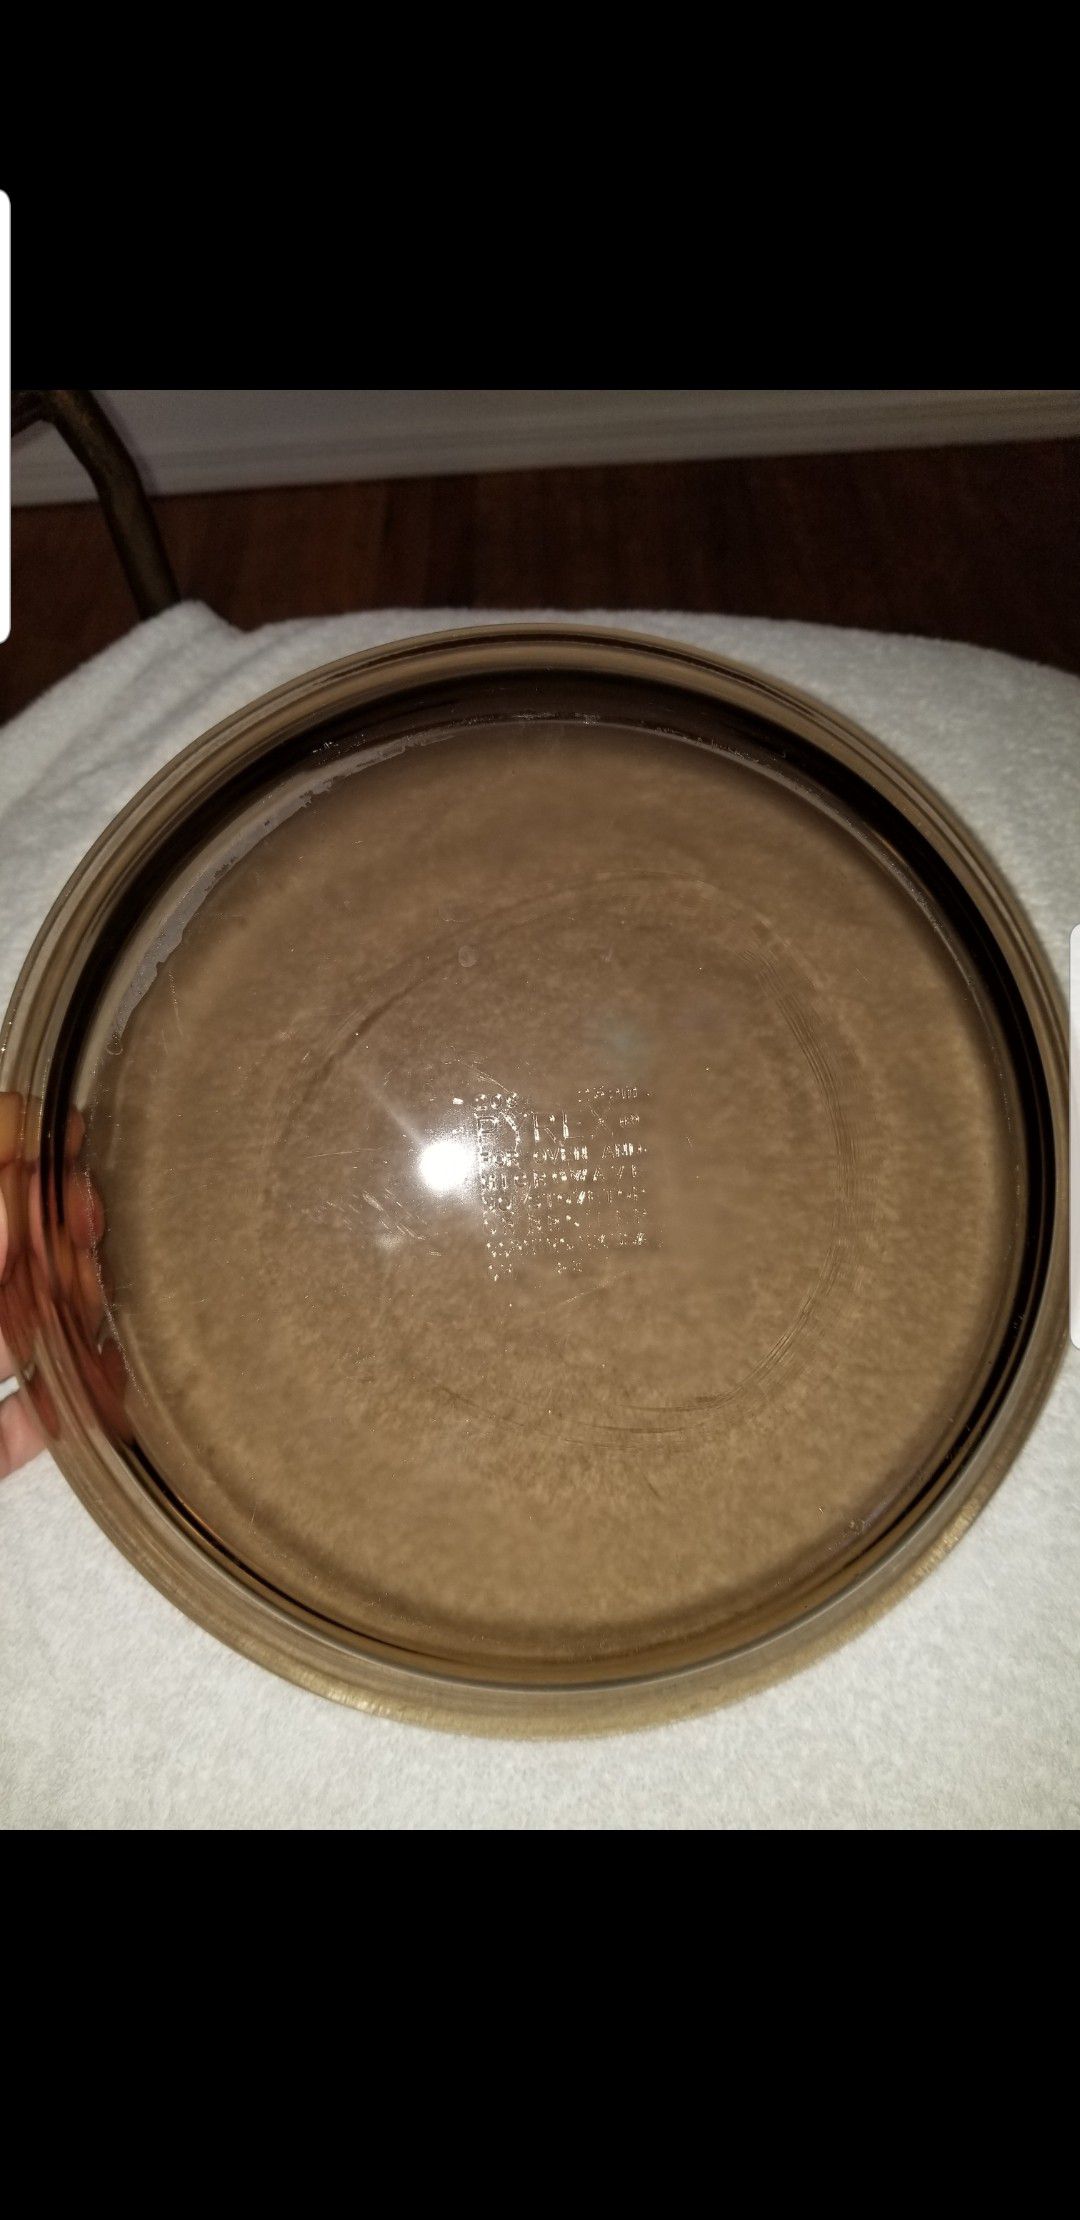 2 Vintage pyrex brown pie plates both for $10